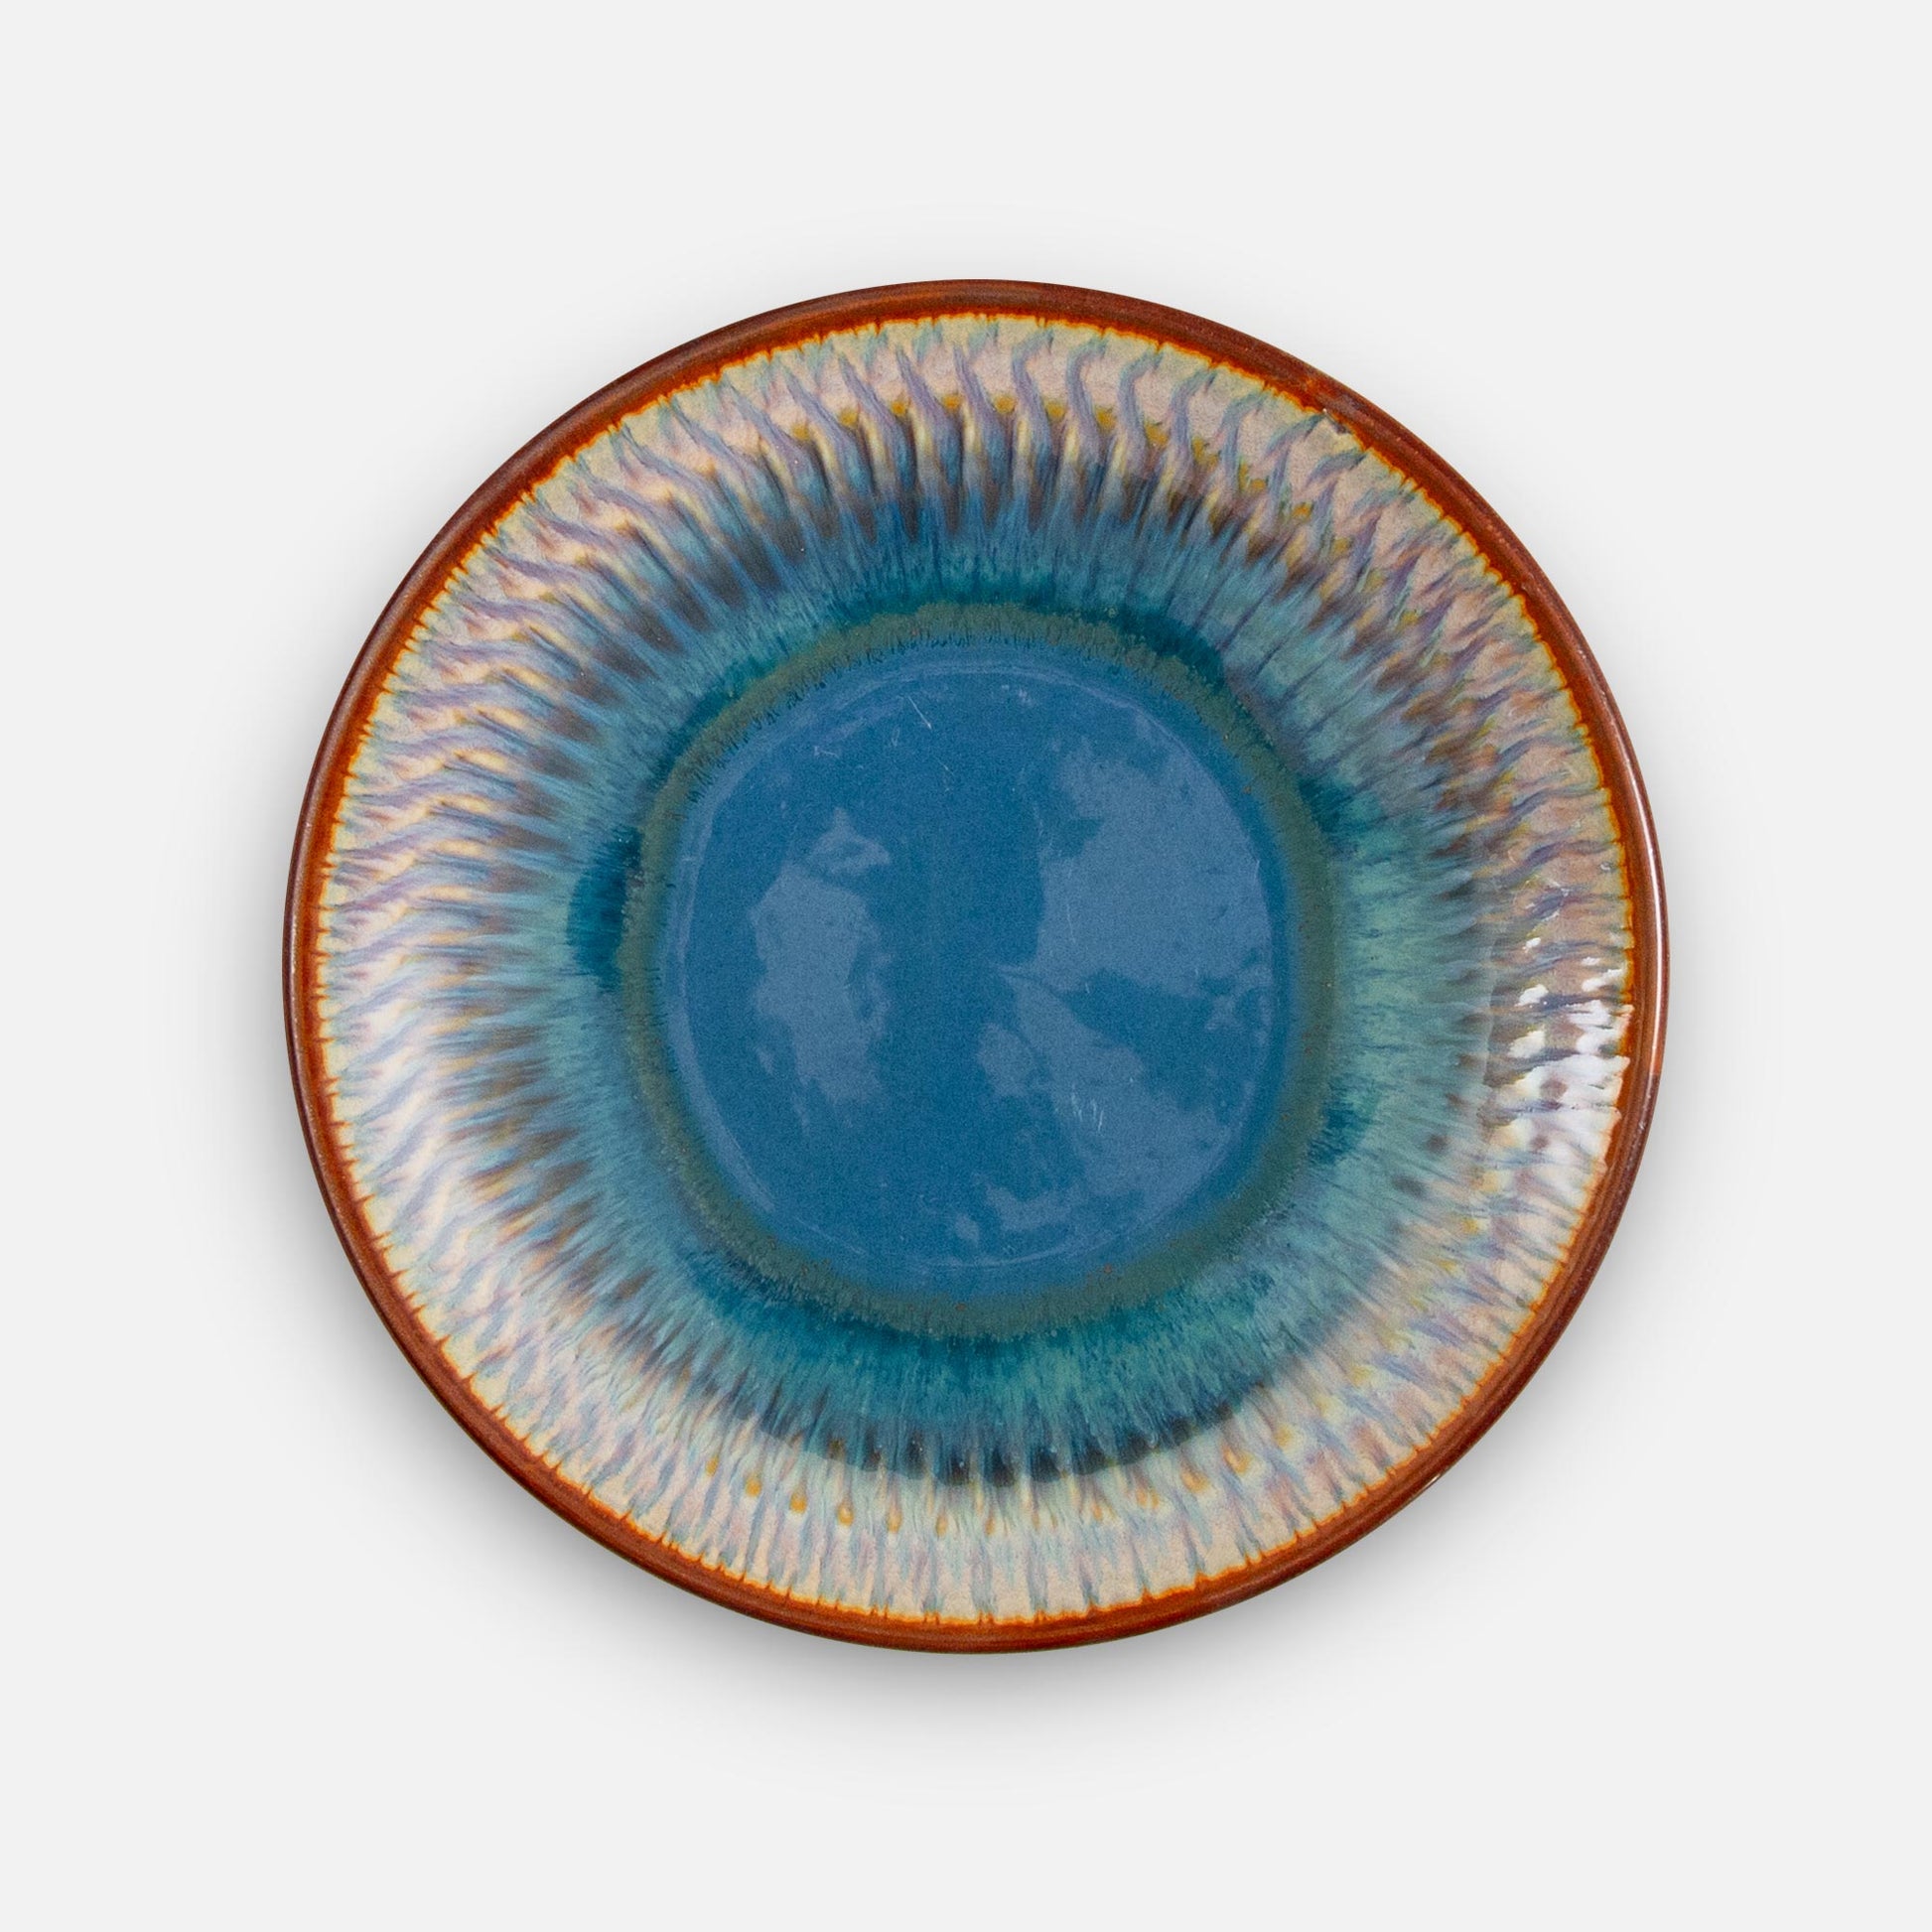 Handmade Pottery Rimless Dinner Plate made by Georgetown Pottery in Maine in Blue Oribe Pattern